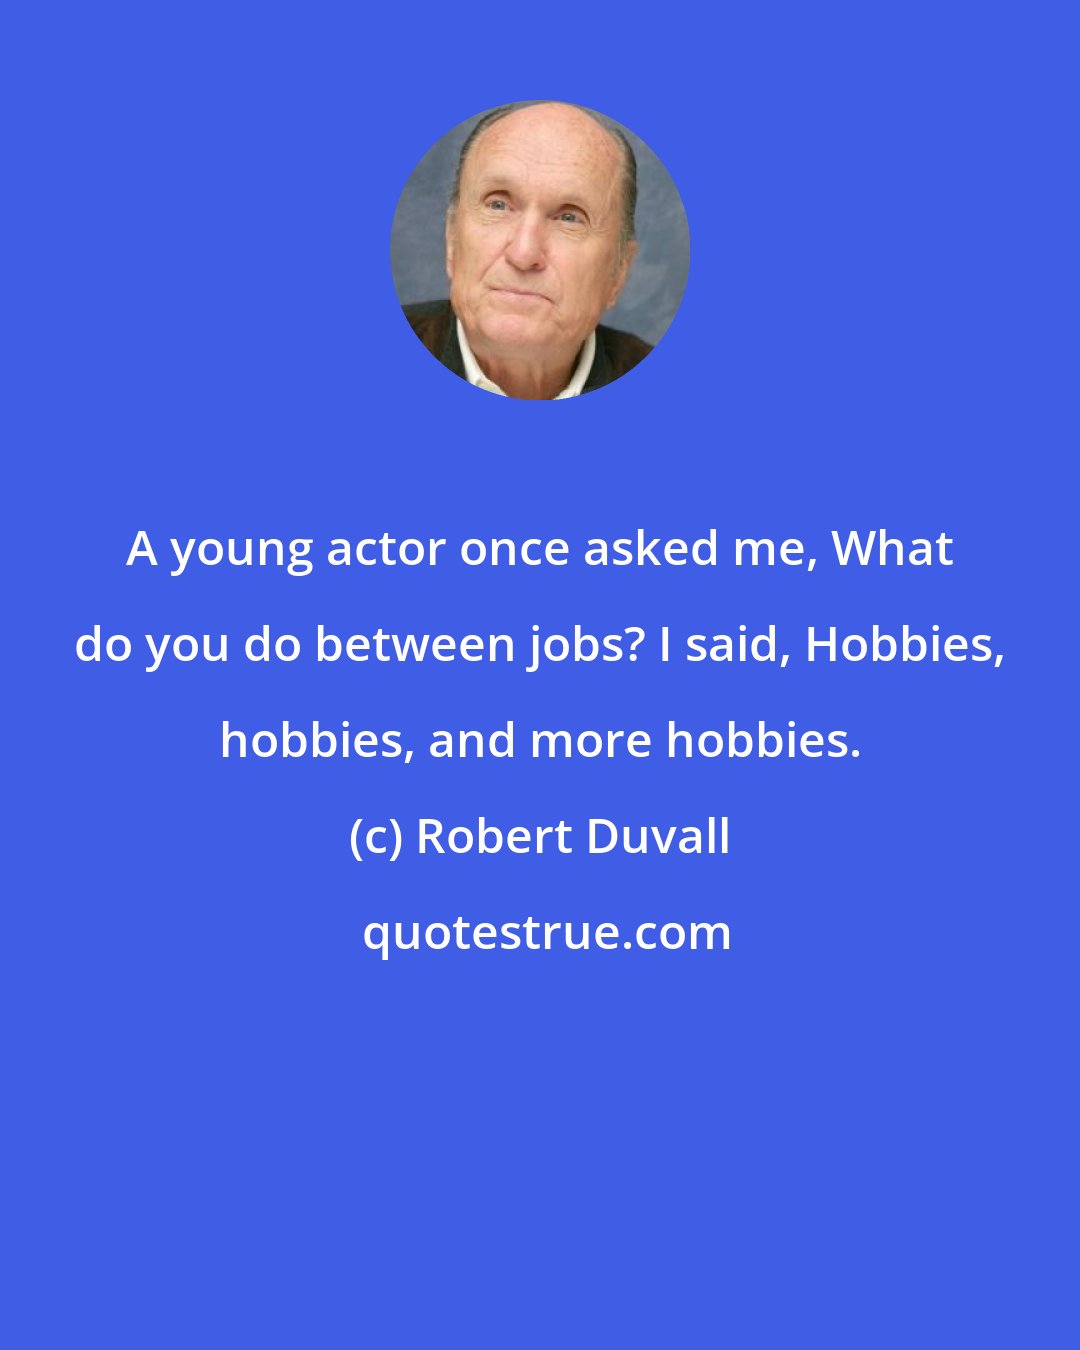 Robert Duvall: A young actor once asked me, What do you do between jobs? I said, Hobbies, hobbies, and more hobbies.